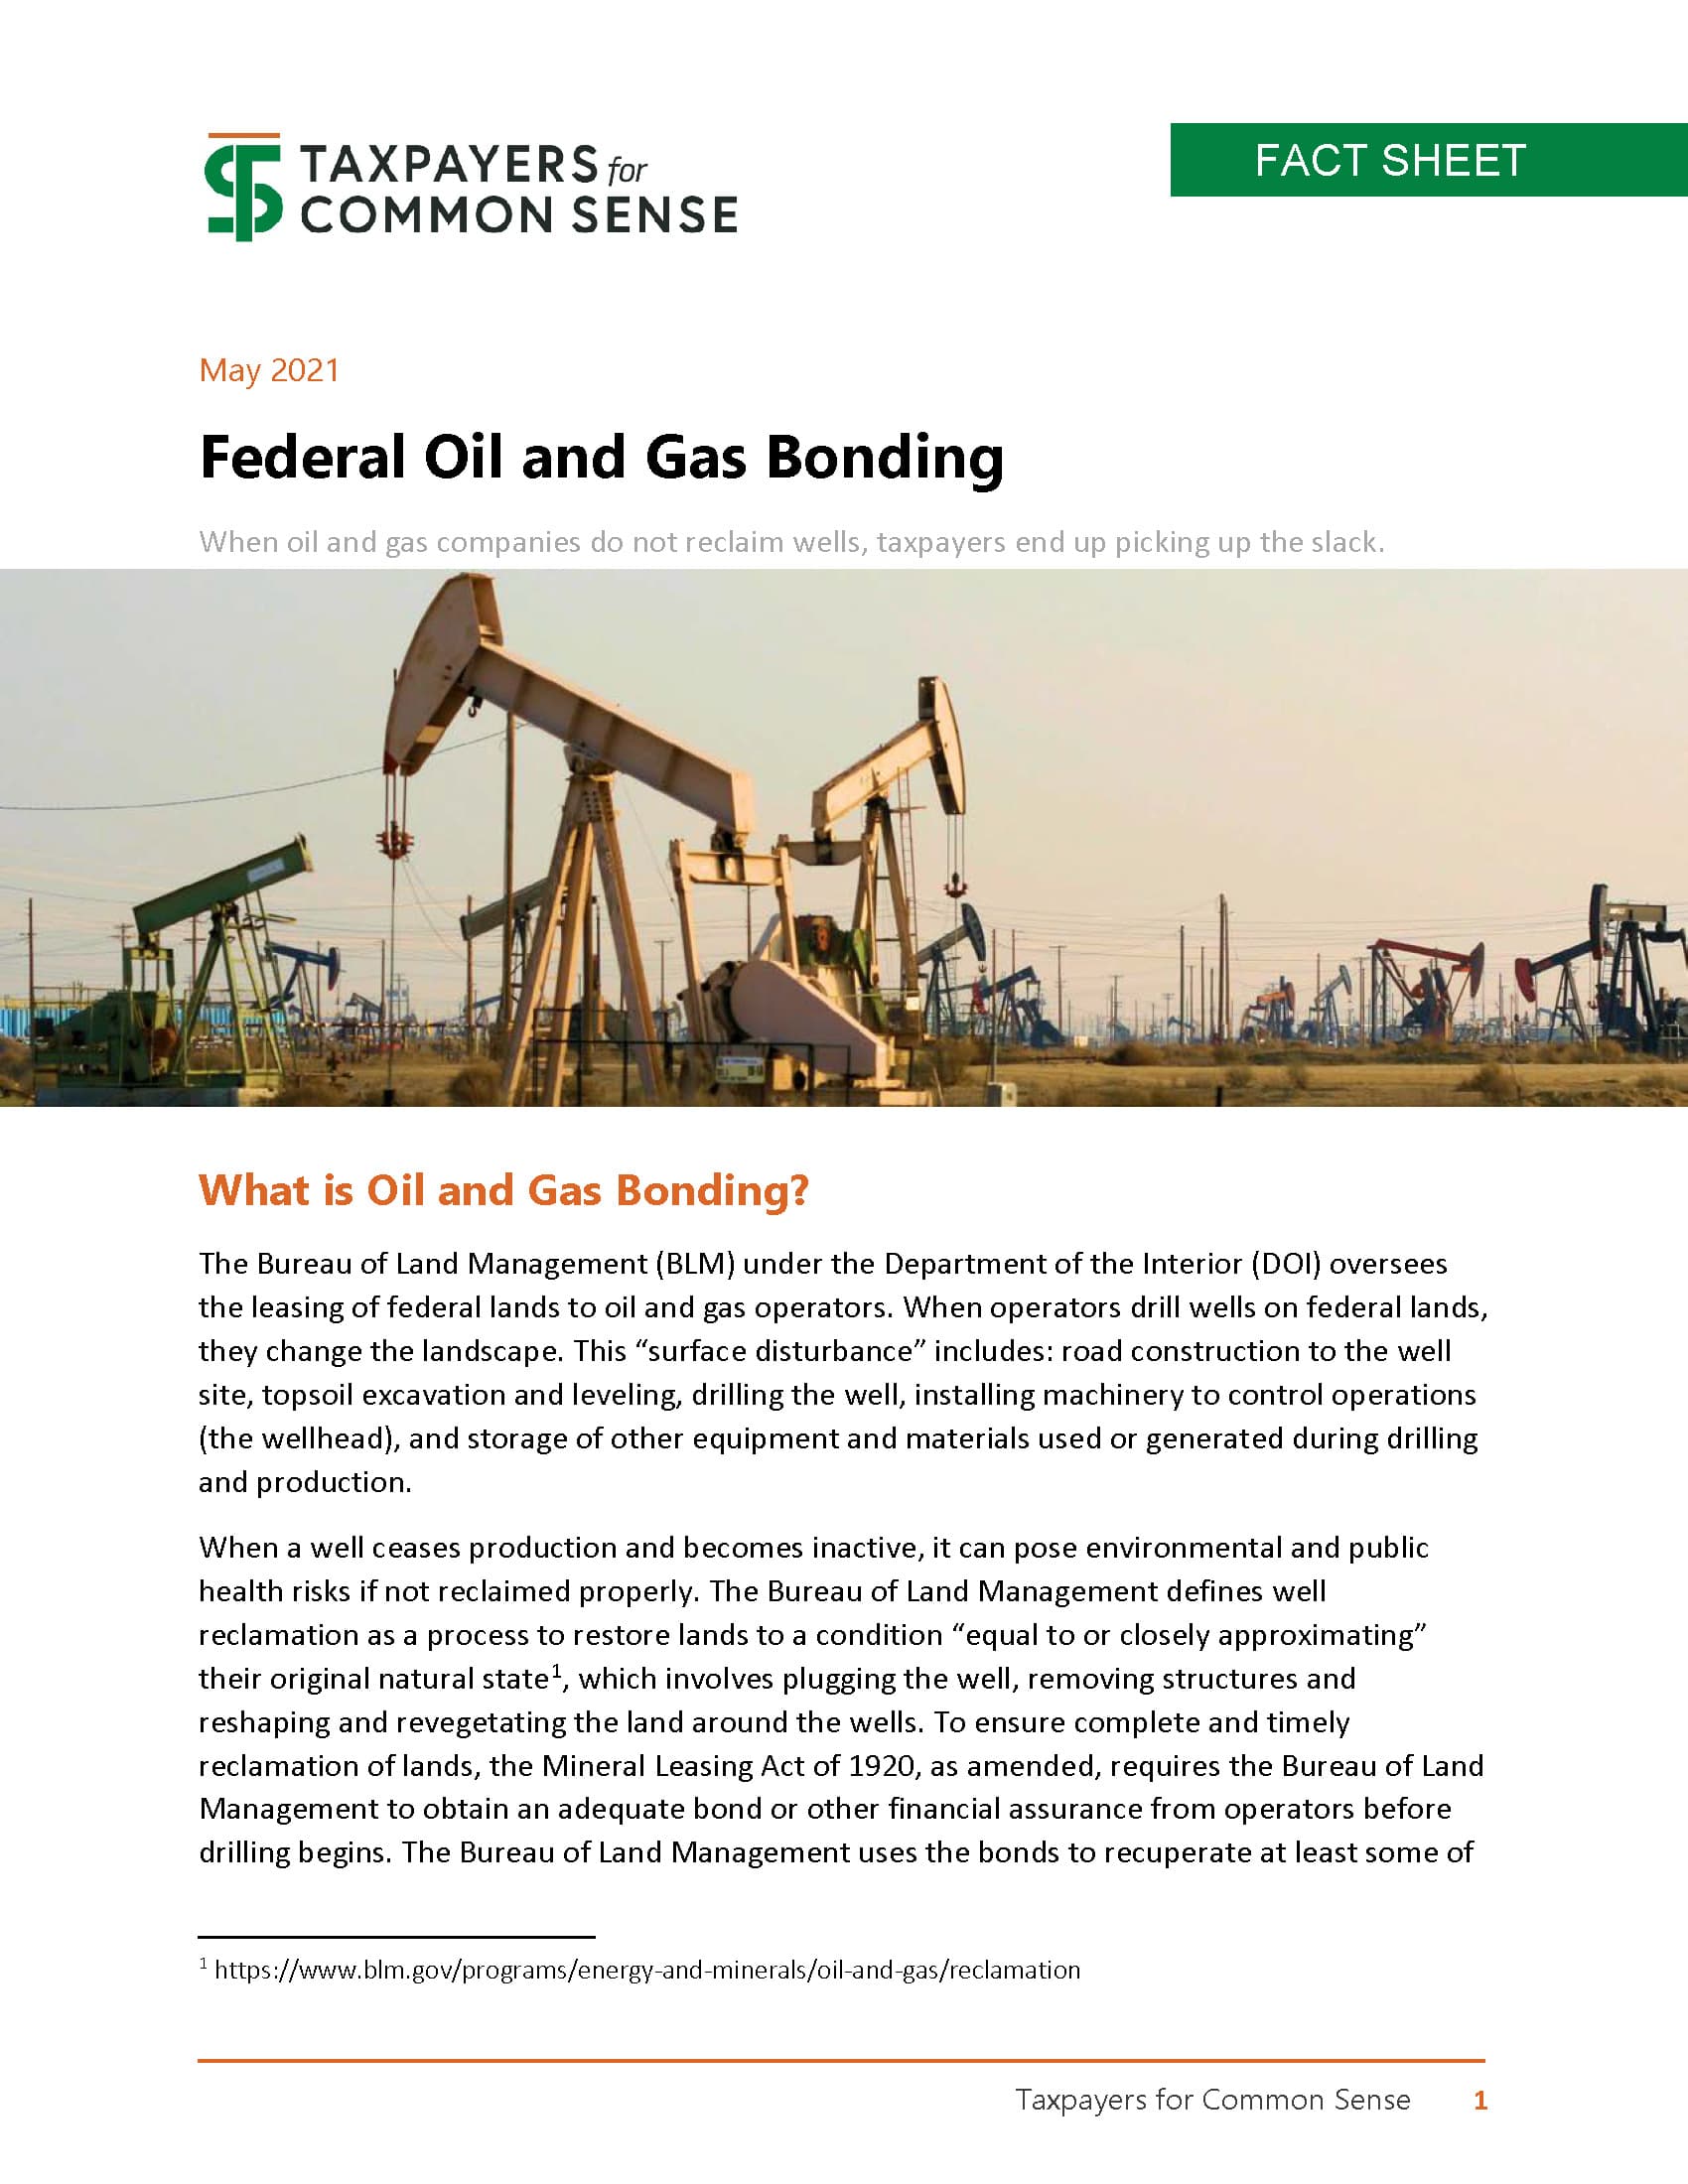 Cover of May 2021 Federal Oil and Gas Bonding Fact Sheet